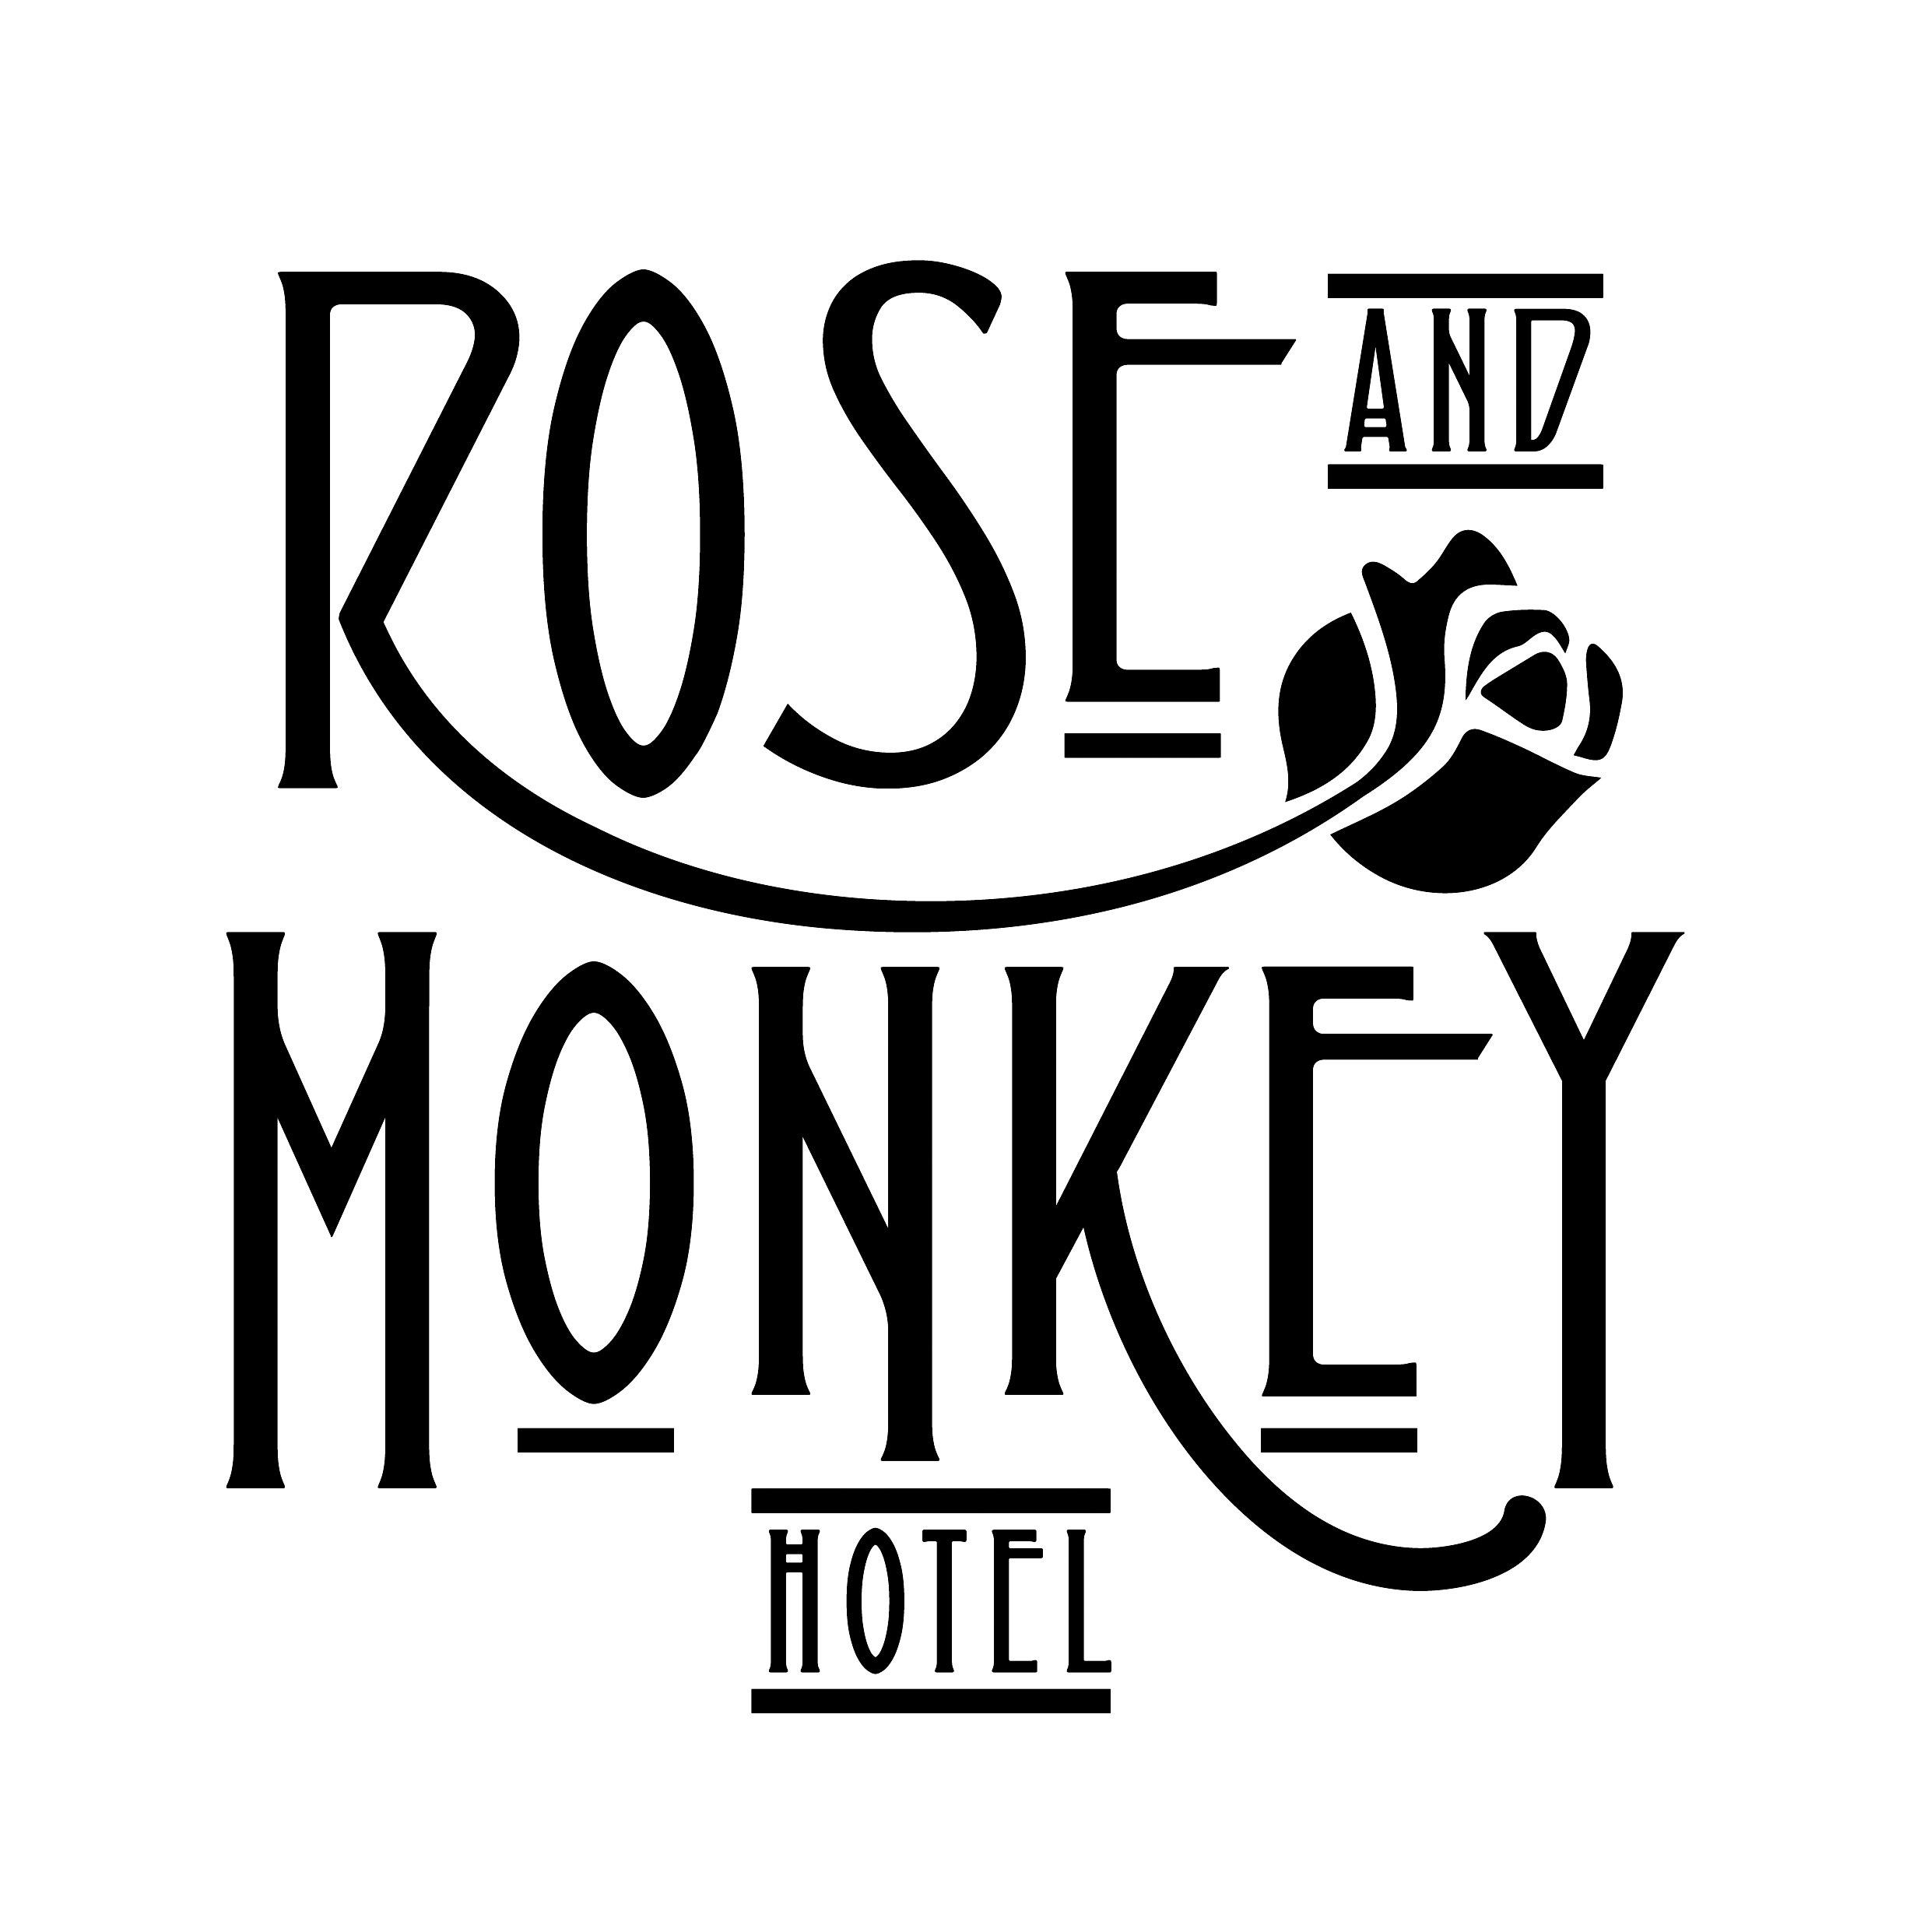 The Rose and Monkey  - The Bar and Garden image 2